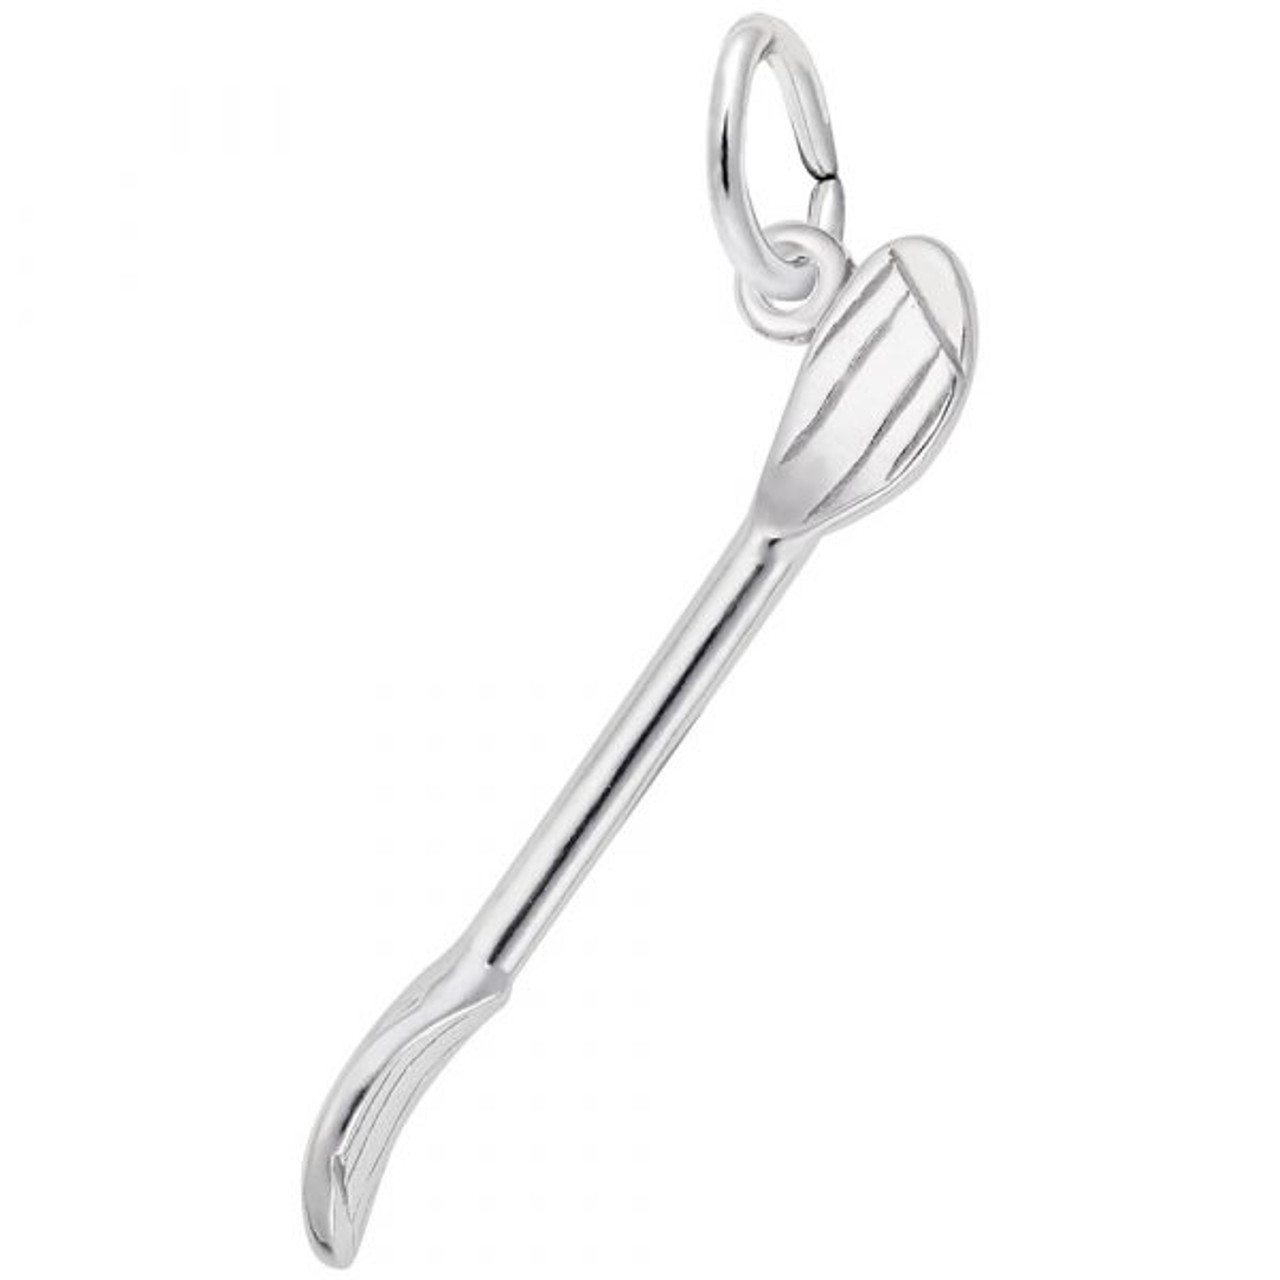 Kayak Paddle Charm - 5 Metals Available